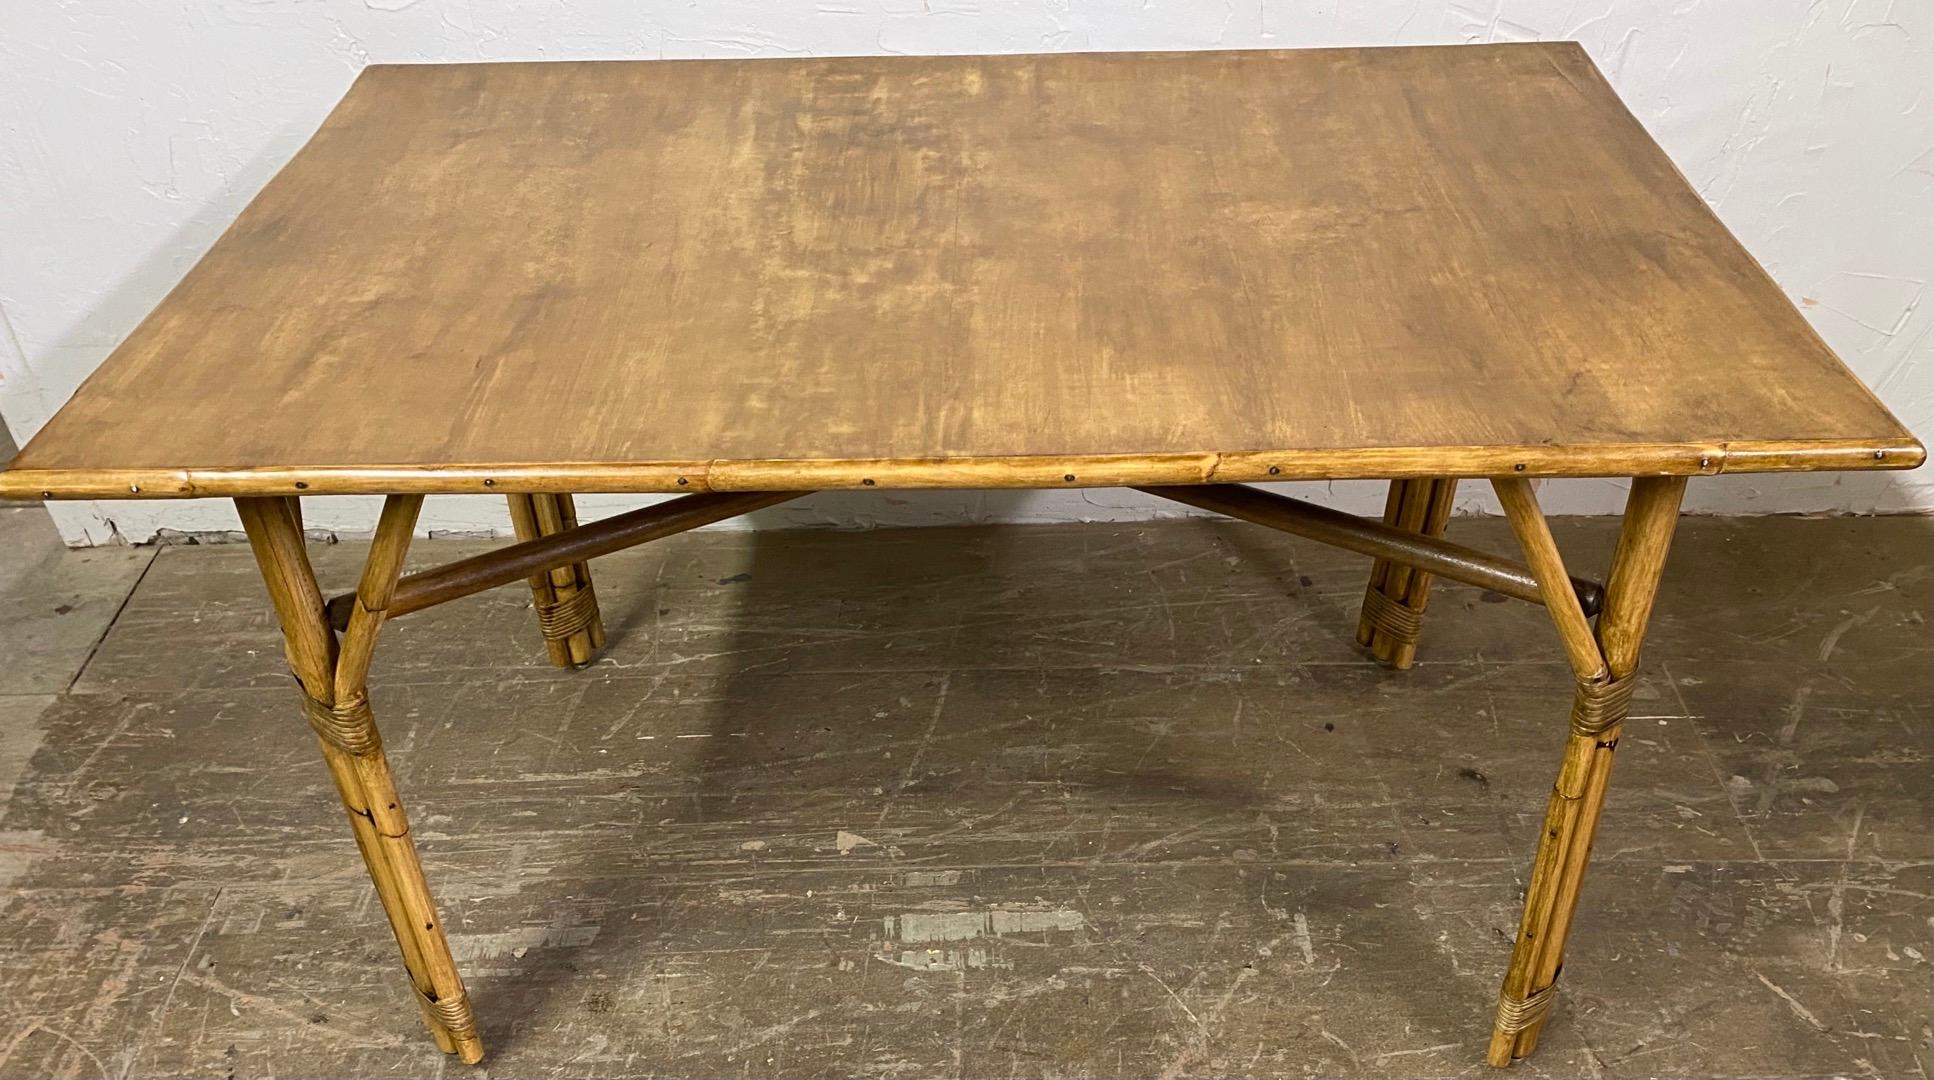 20th Century Vintage Mid-Century Modern Rattan Desk or Table For Sale